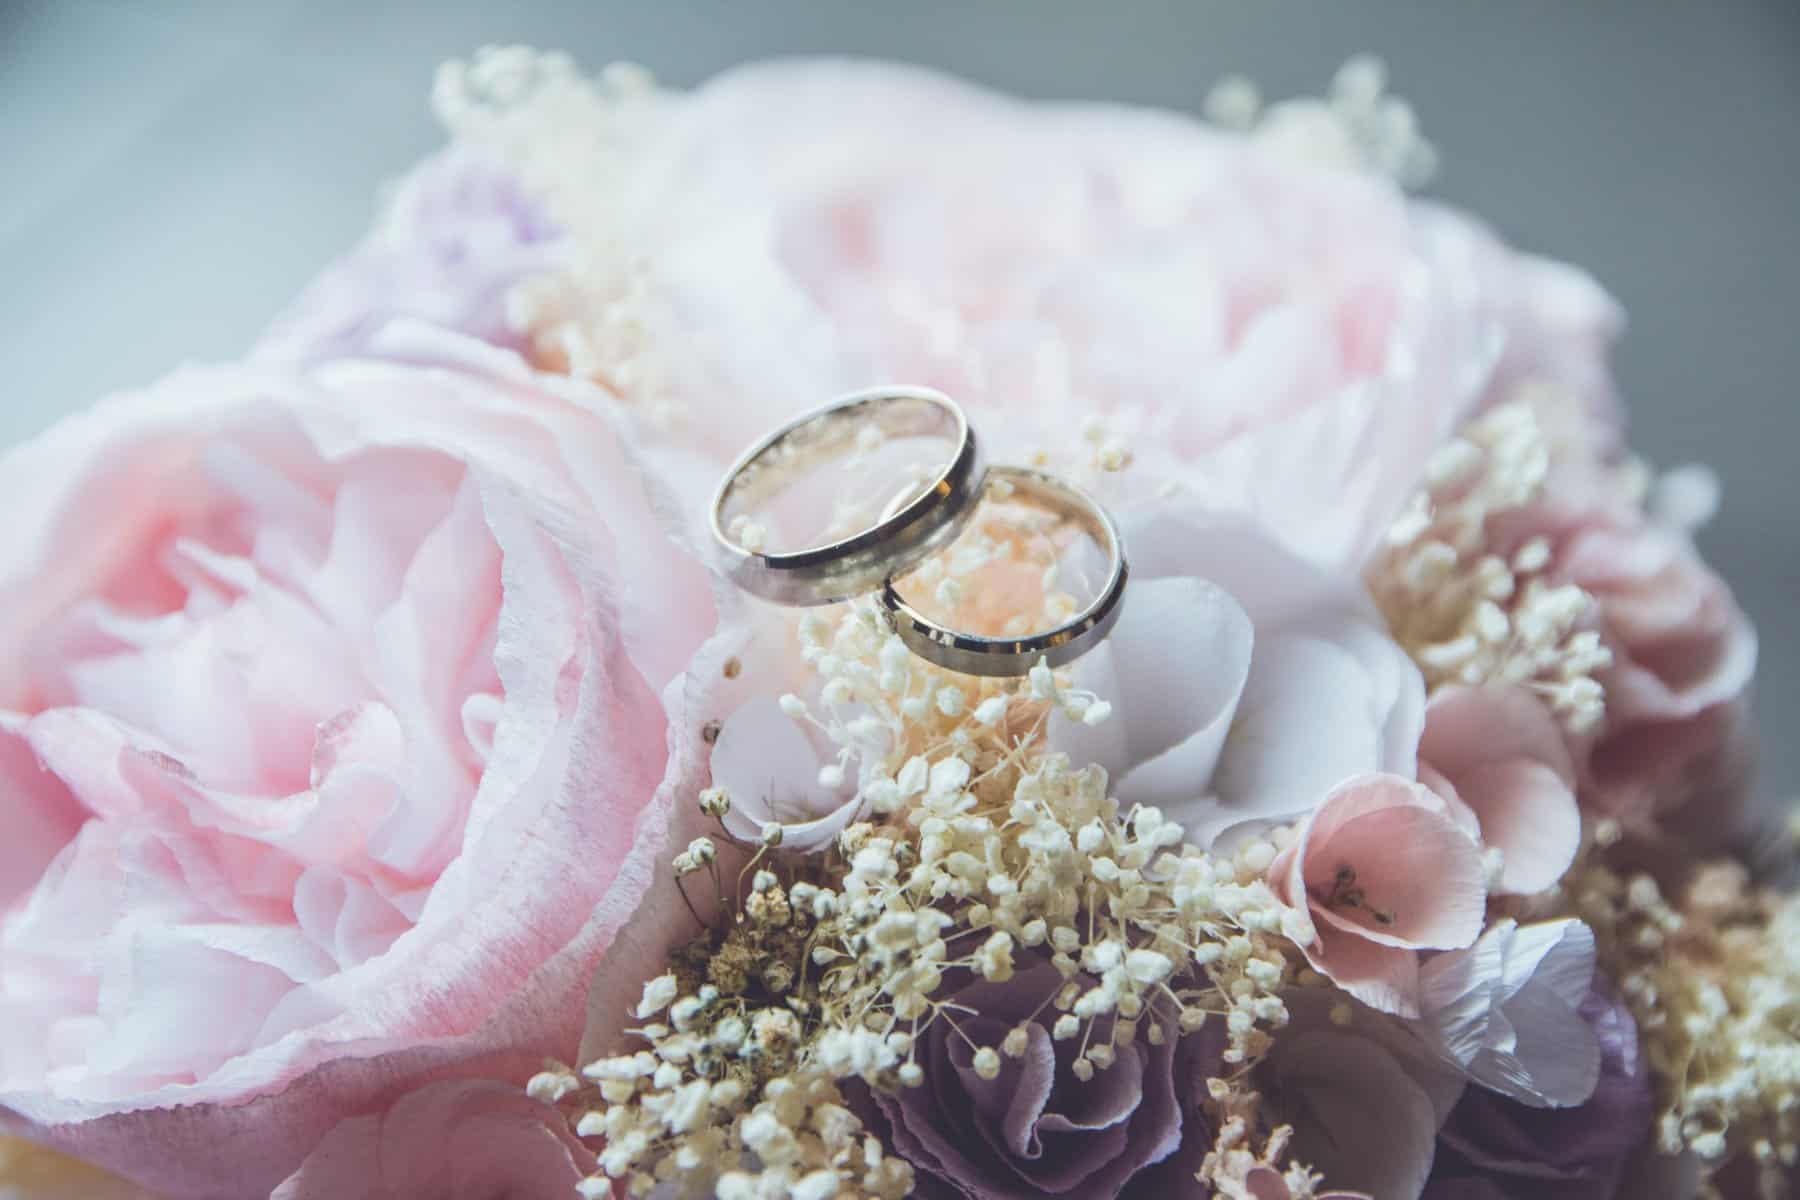 Featured Image: bridal bouquet of pink roses with the bride and groom's wedding bands laying on top of it